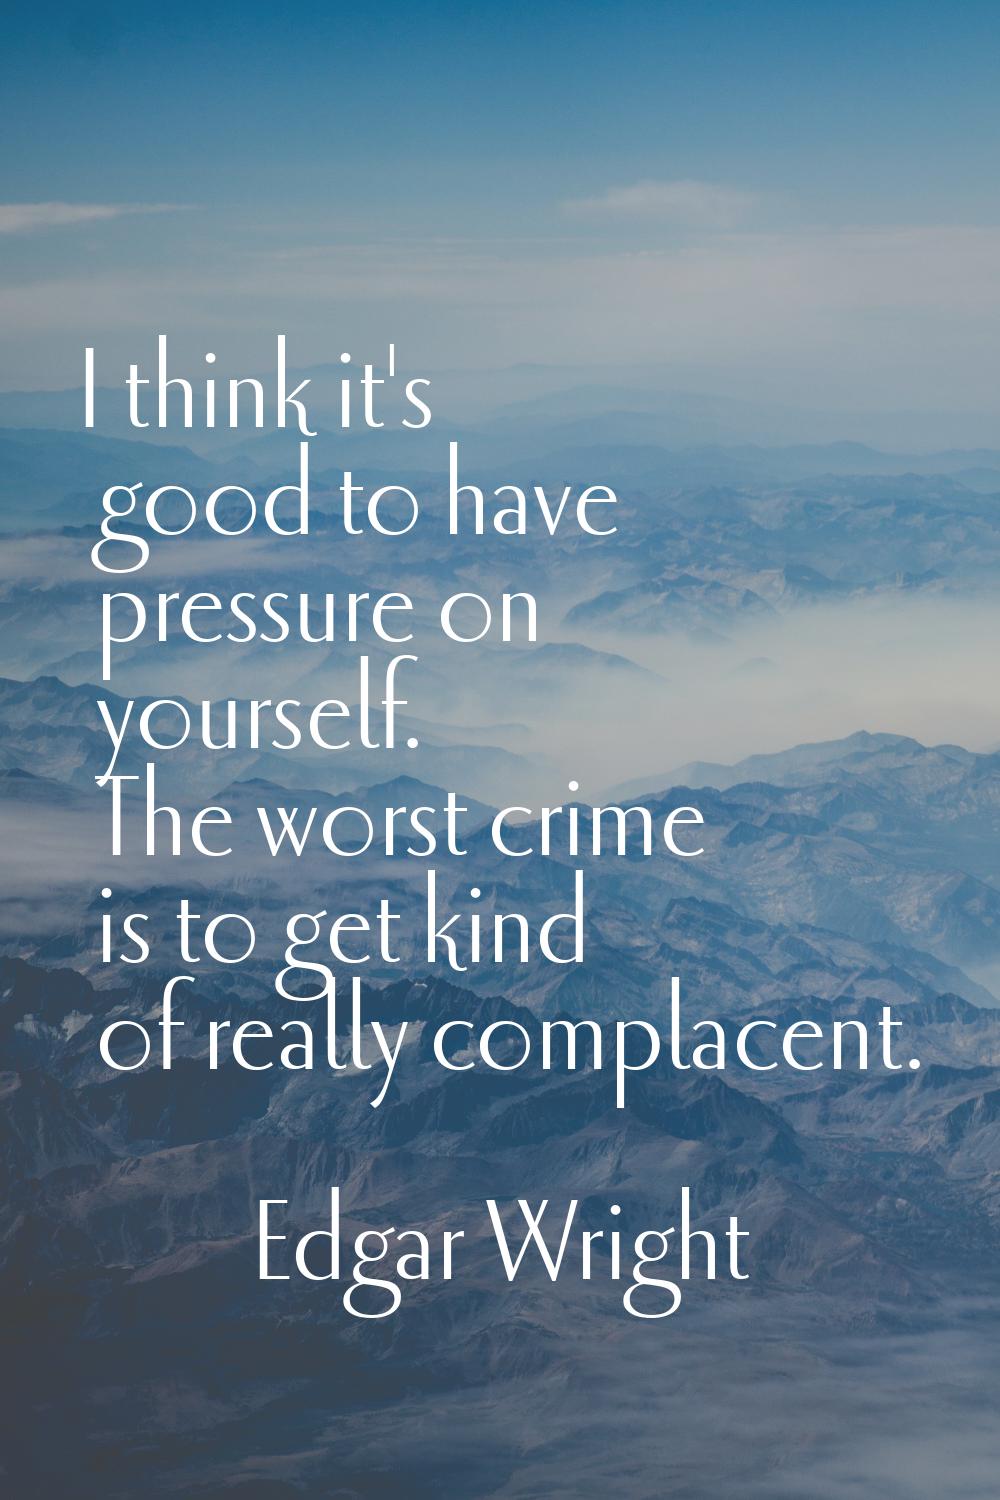 I think it's good to have pressure on yourself. The worst crime is to get kind of really complacent